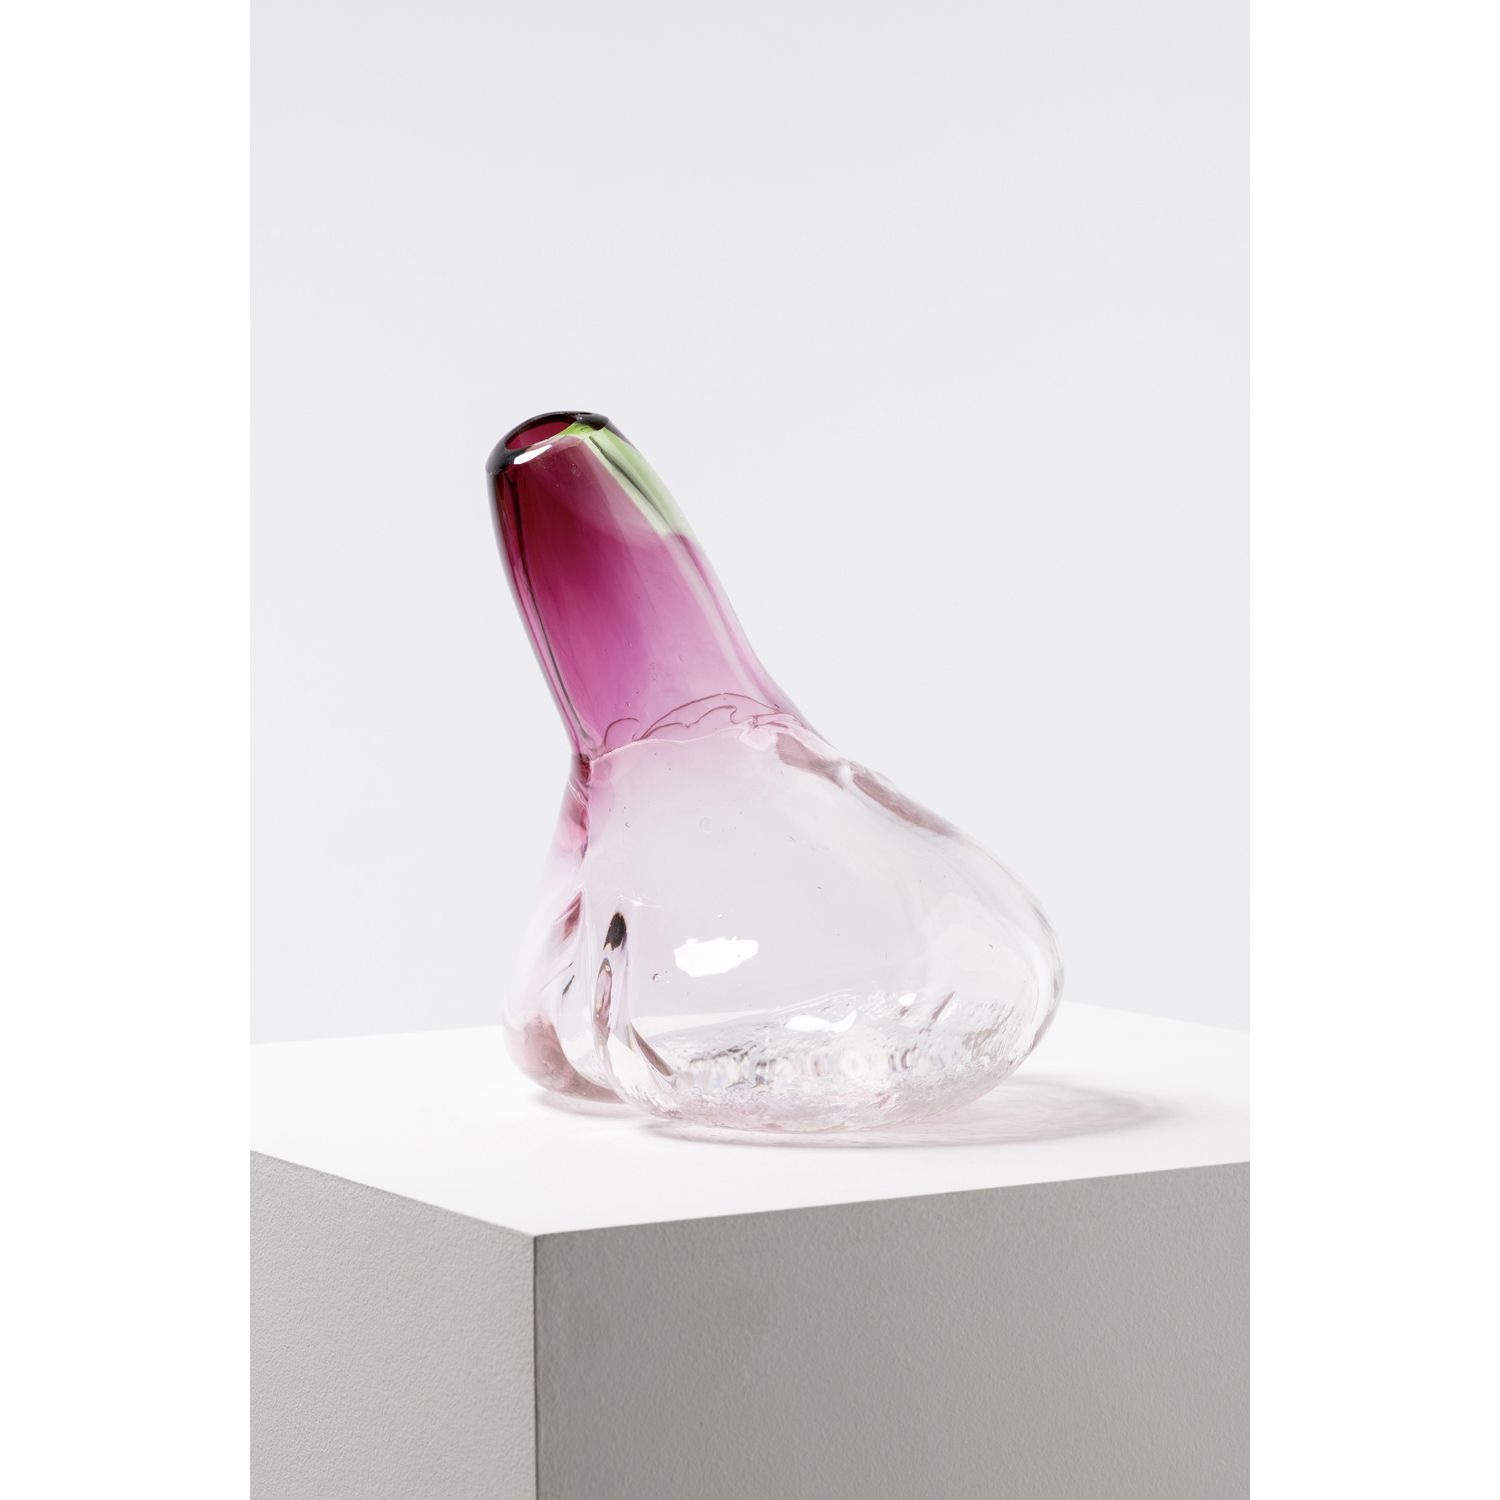 Null Erik Dietman (1937-2002)

Untitled, circa 1989

Blown glass

Signed and dat&hellip;